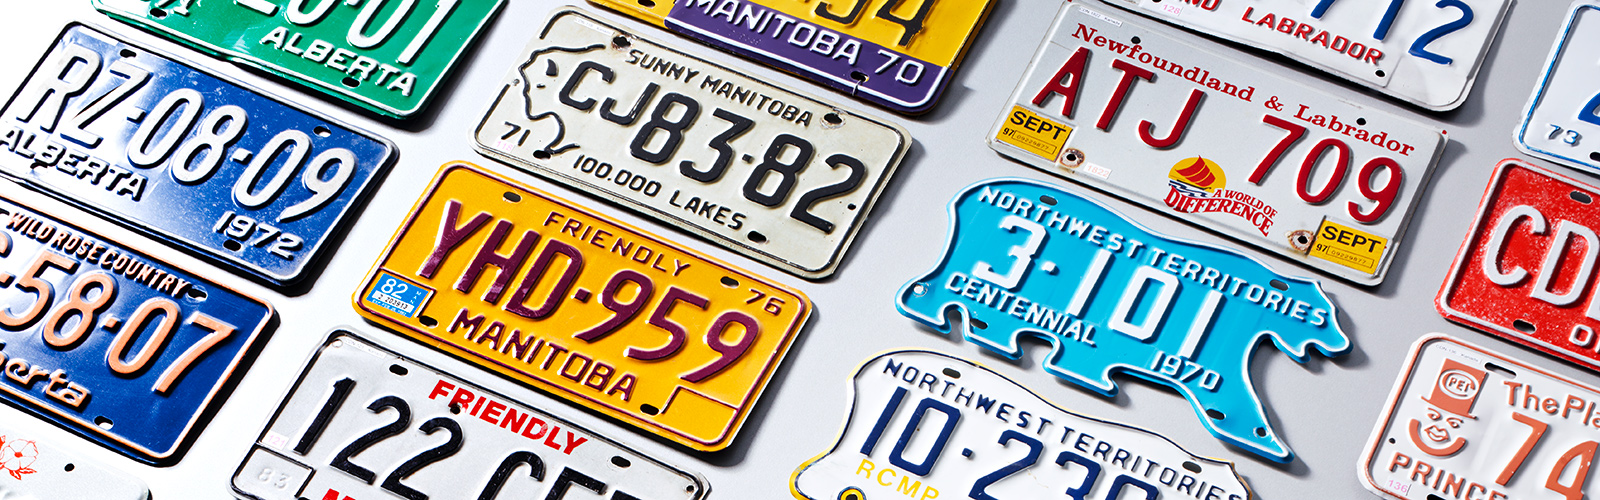 License Plates & Documents